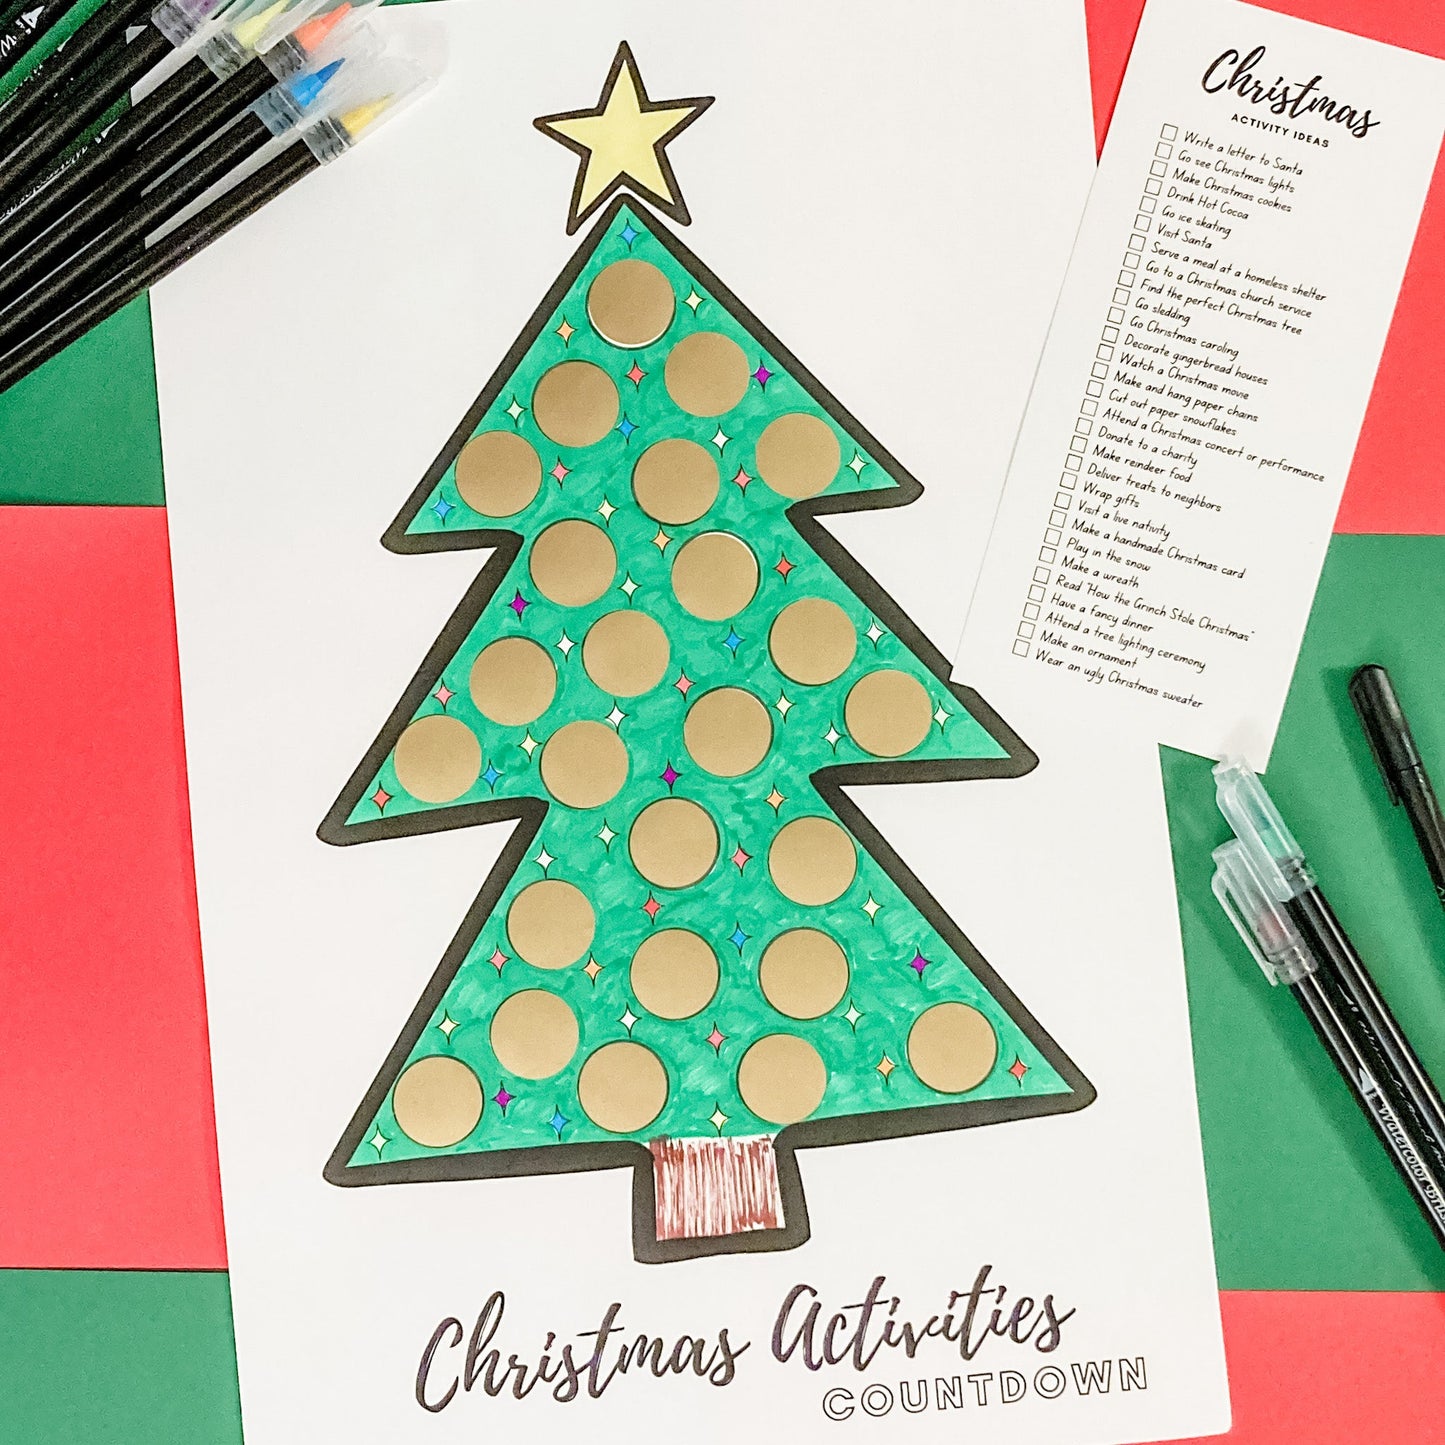 The Advent Scratch-off Christmas tree poster is displayed with each of it's spots covered with gold circle scratch-off stickers.